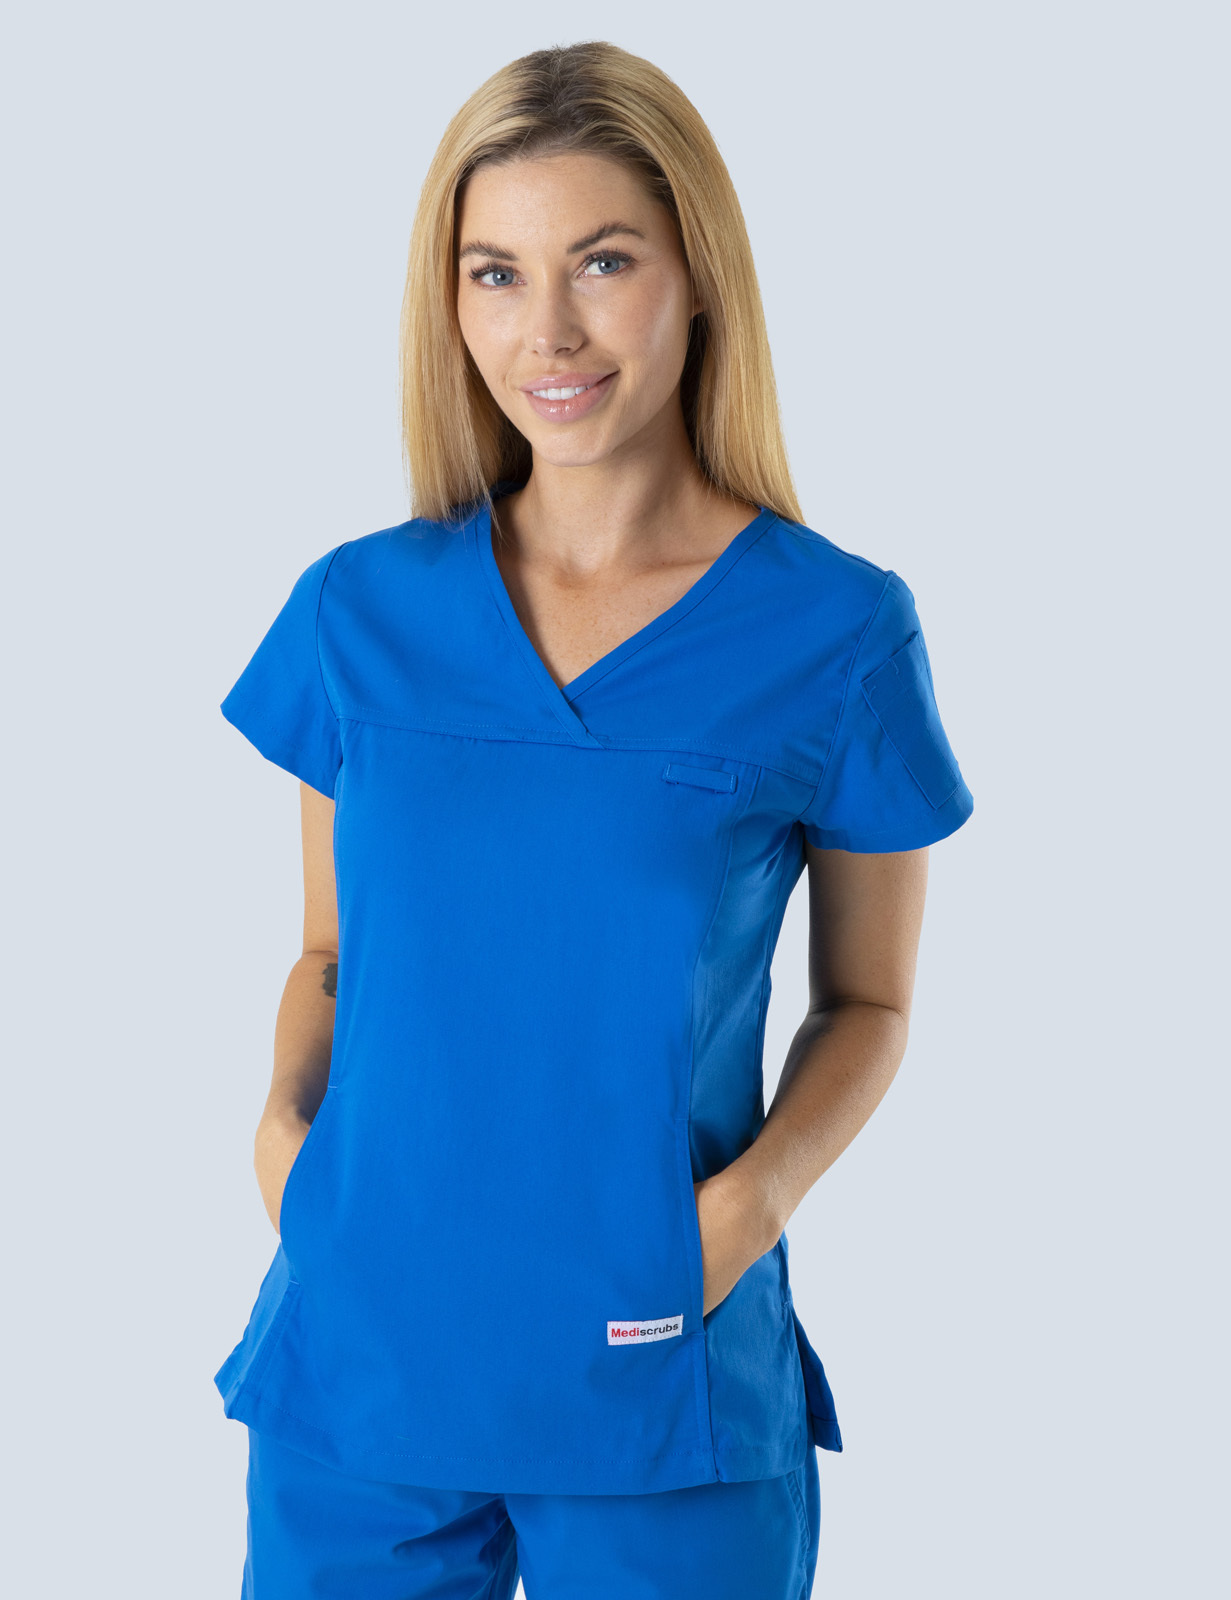 Canberra Hospital - Cardiology Cardiac Sonographer (Women's Fit Solid Scrub Top in Royal incl Logos)